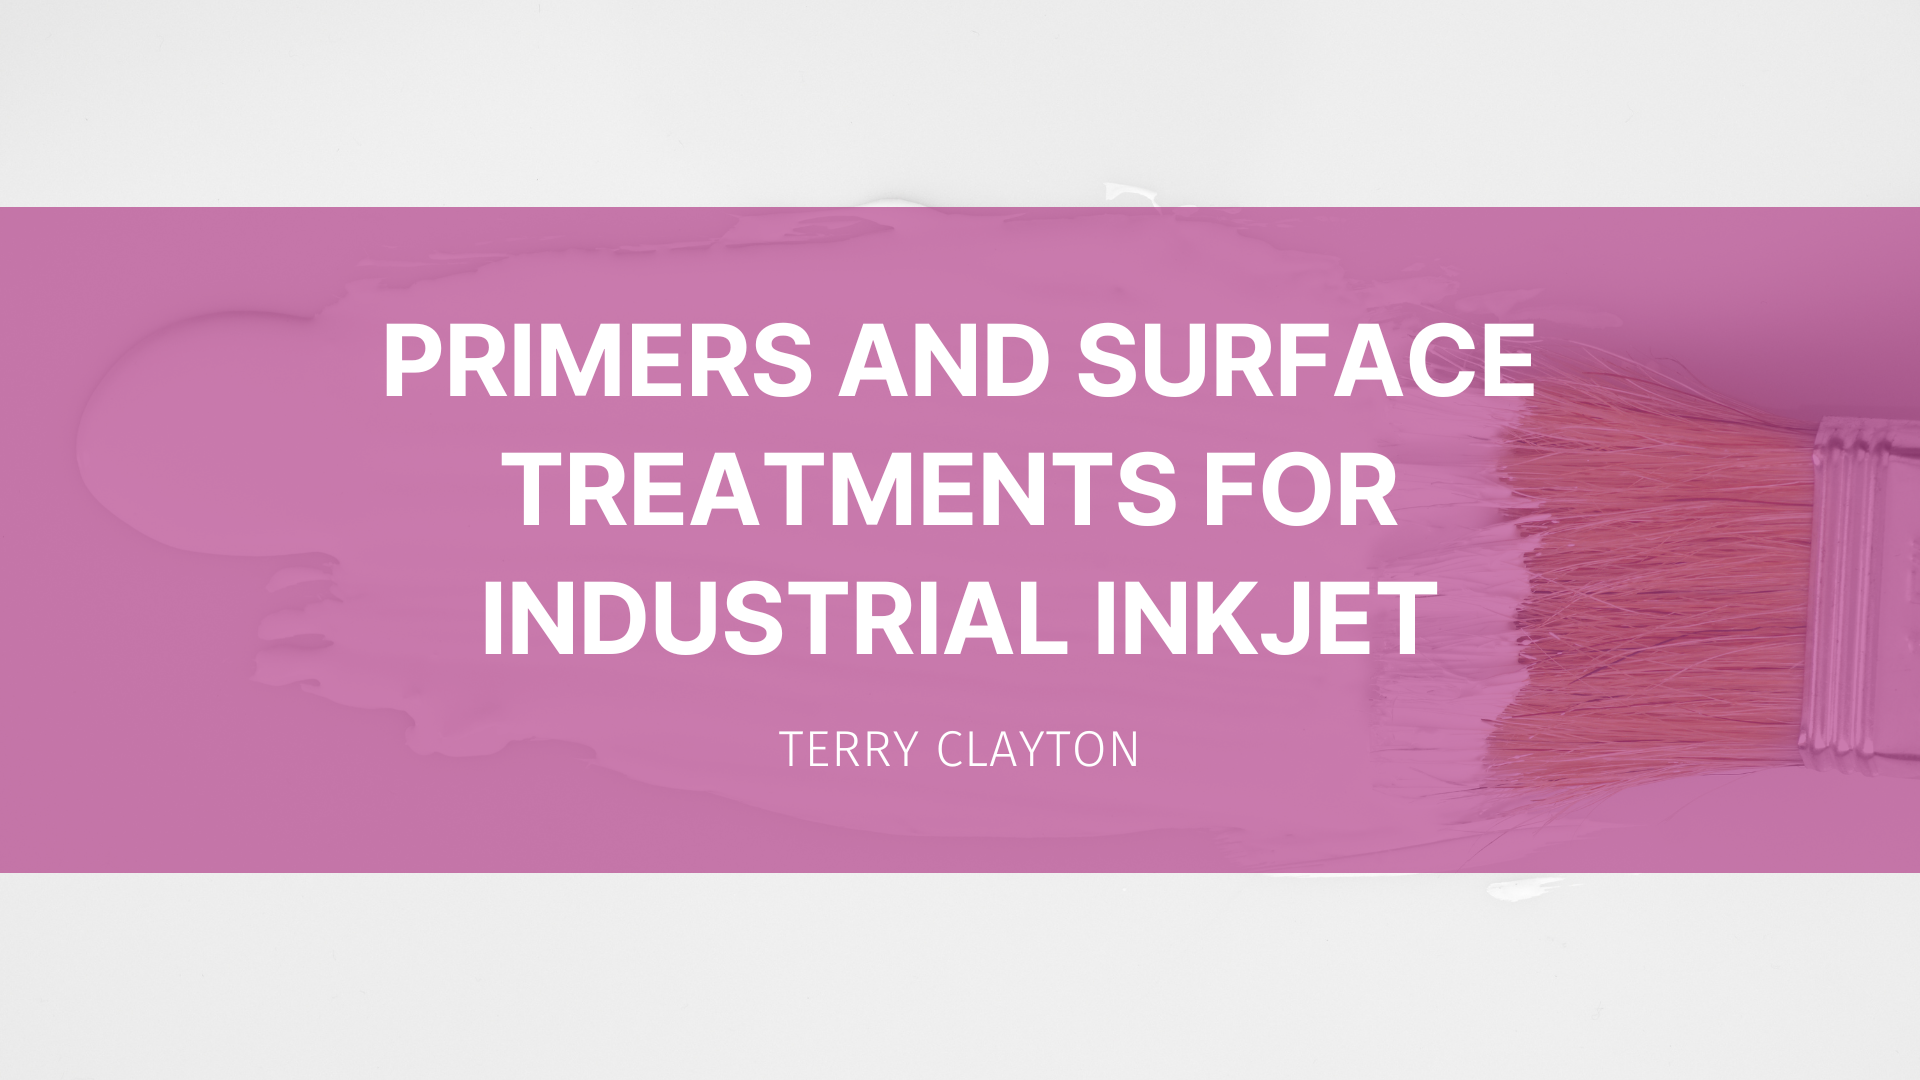 Featured image for “Primers and Surface Treatments for Industrial Inkjet”